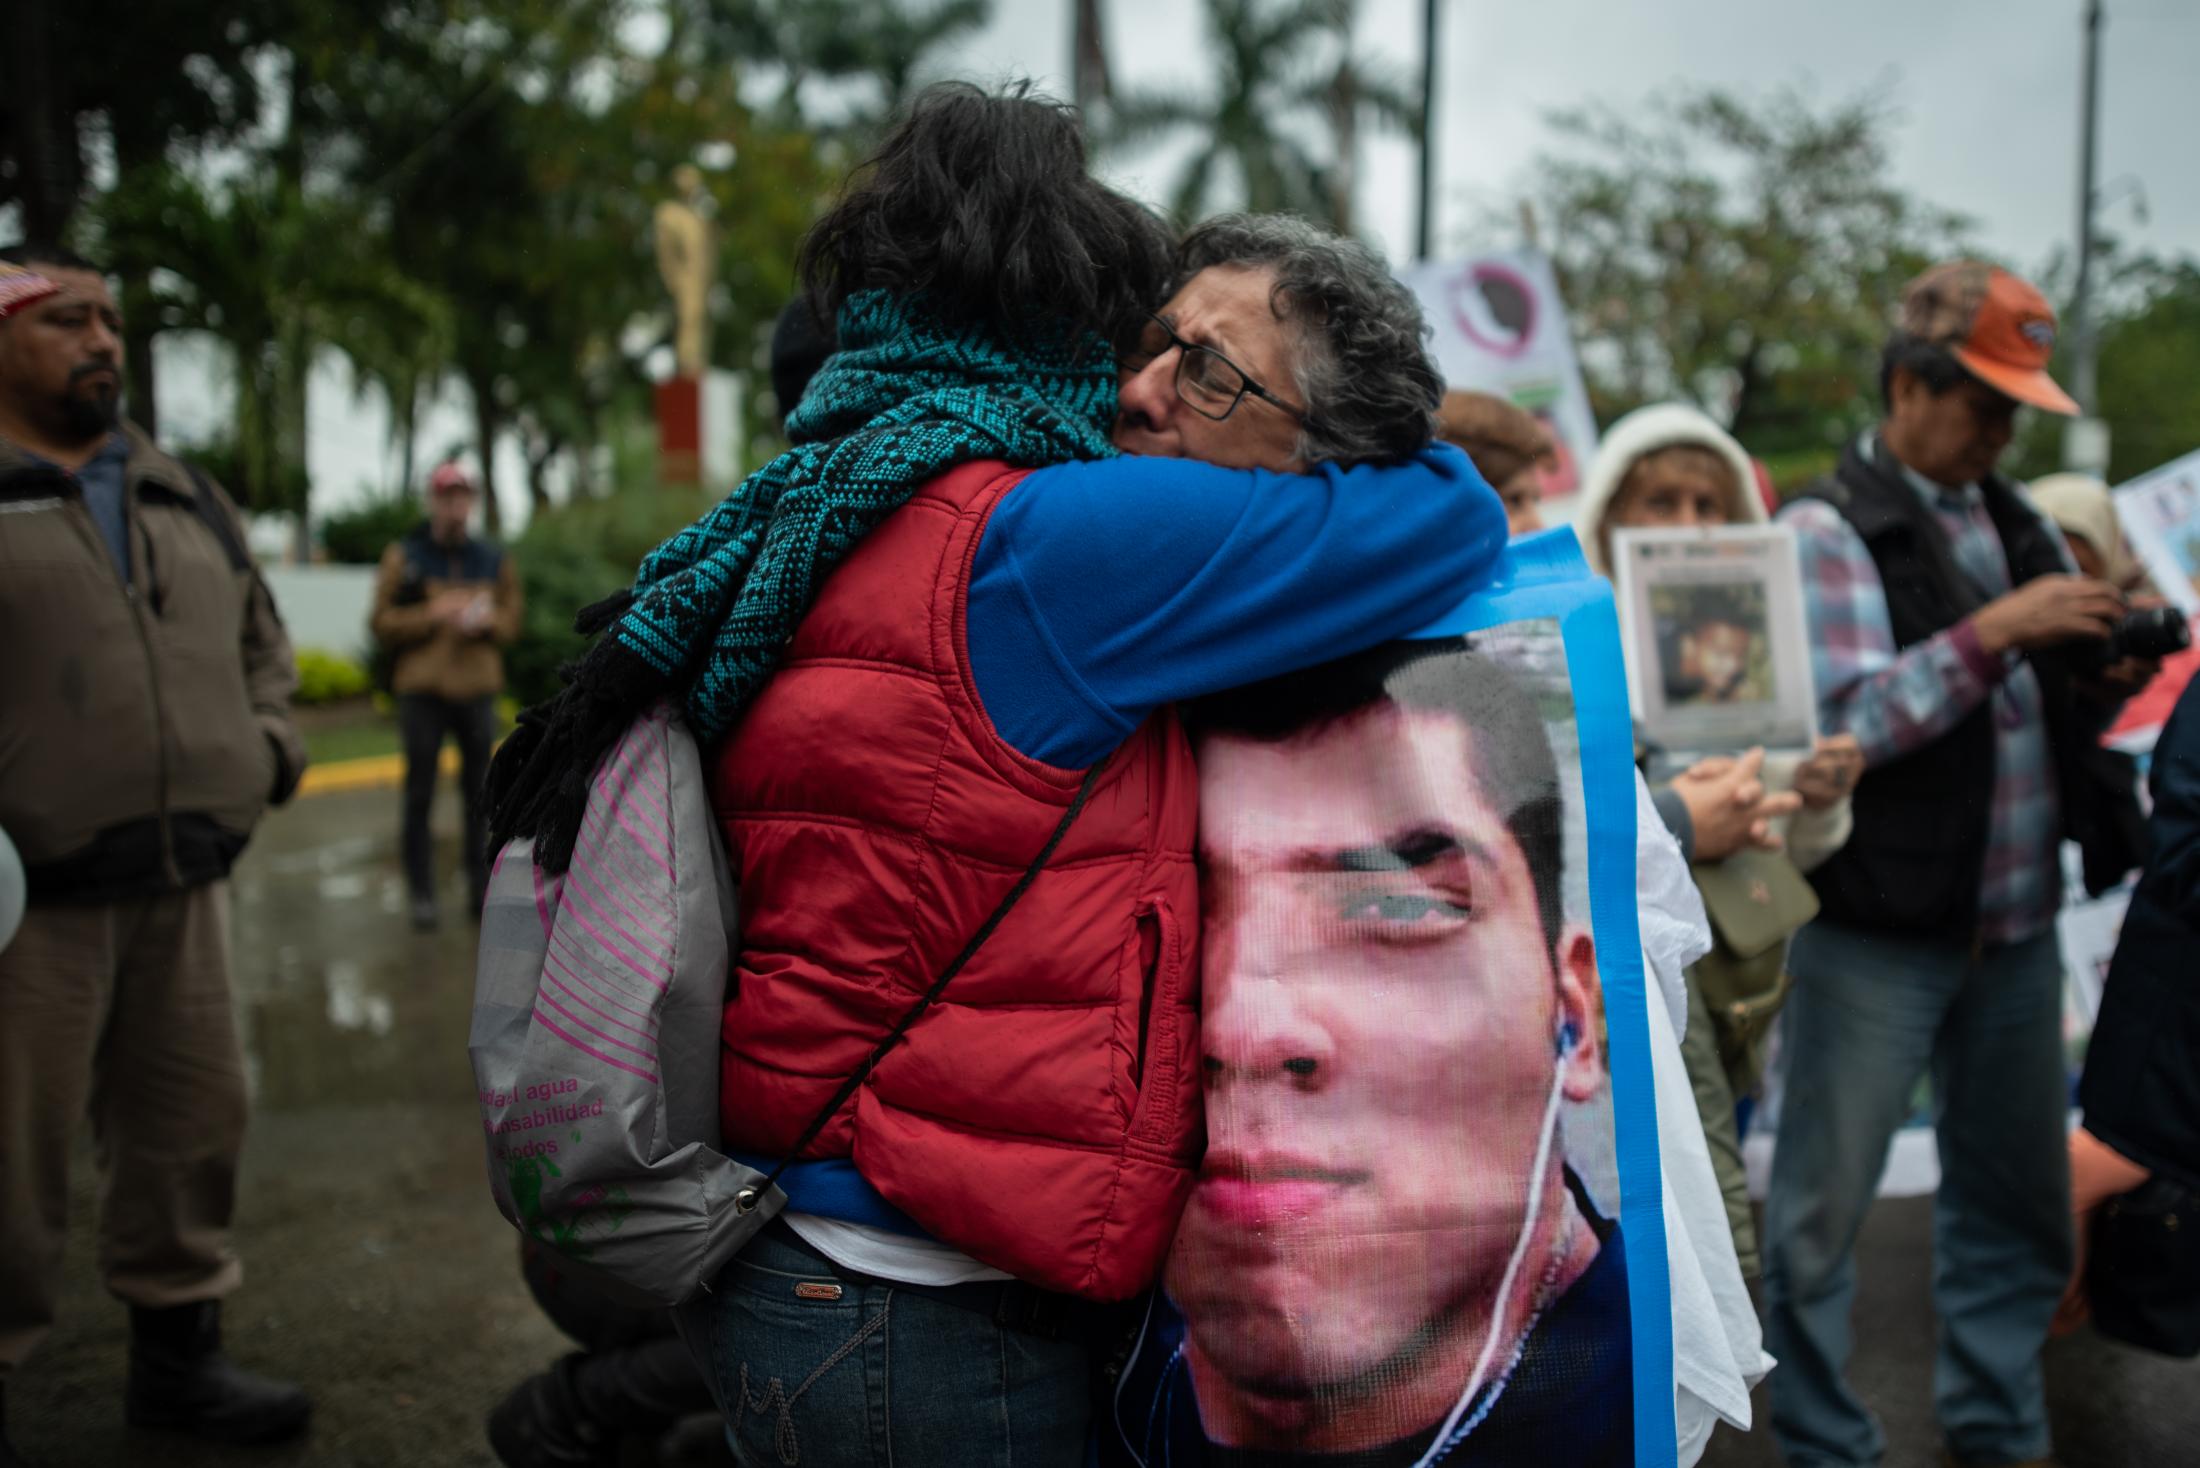 Two women cries during a demonstration of missing persons. Approximately 300 people participated in the fifth National Missing Persons Search Brigade in Poza Rica, Veracruz, Mexico, on February 21, 2020. Victoria Razo for NPR